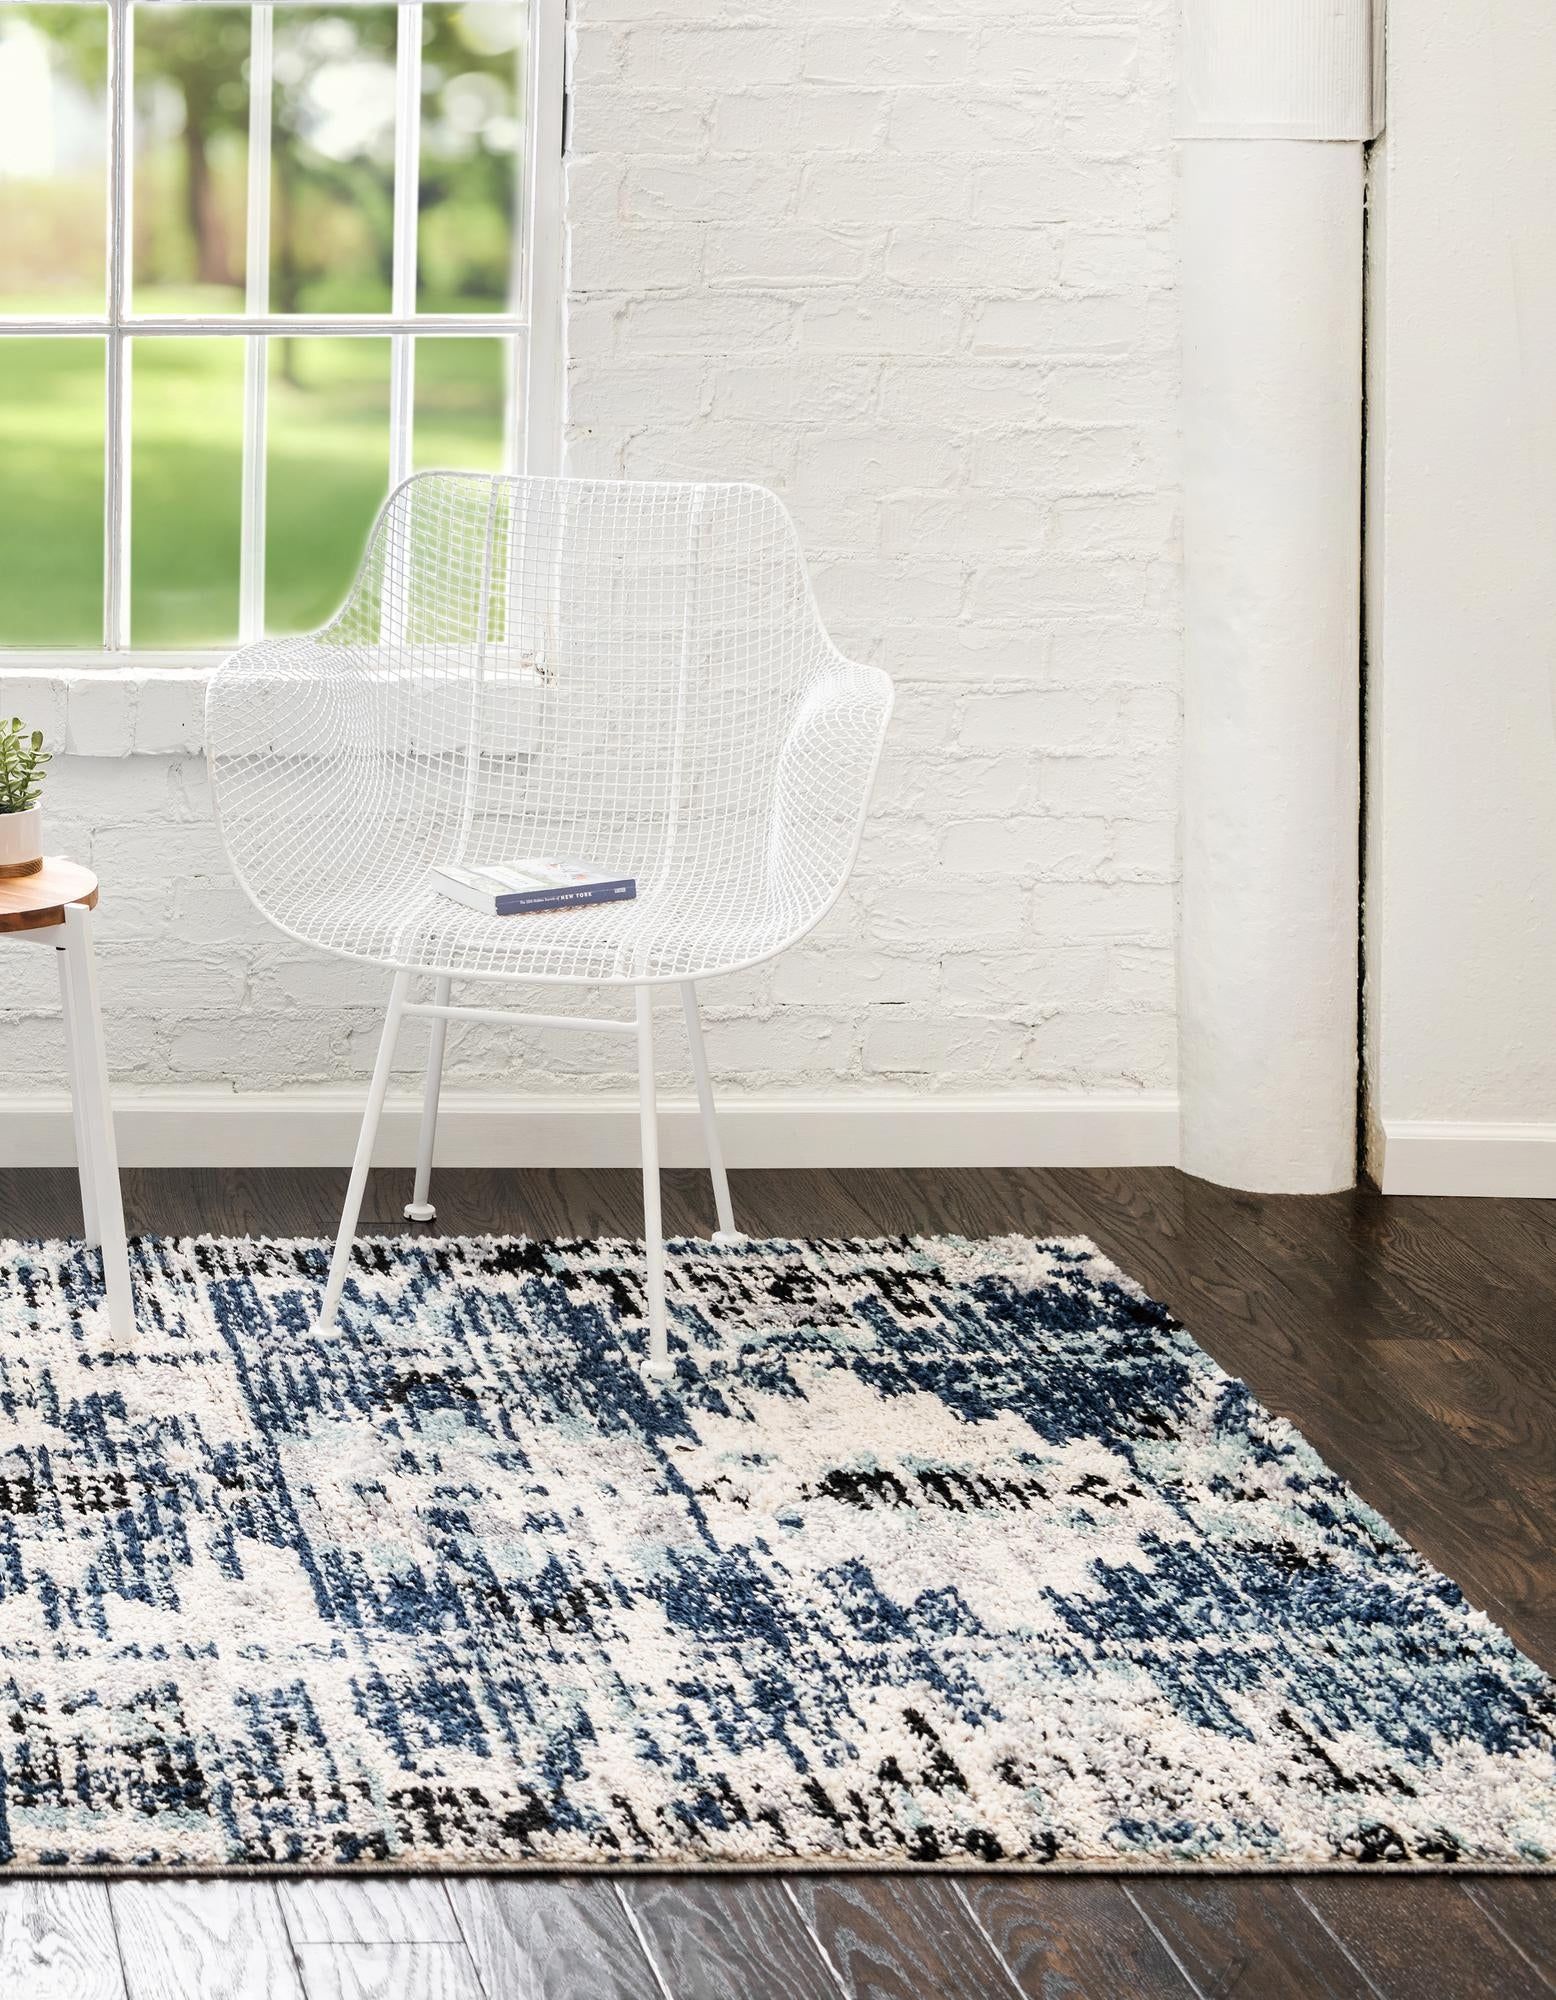 Blue 275cm X 365cm Tucson Rug | Irugs Ch For Blue Tucson Rugs (View 9 of 15)